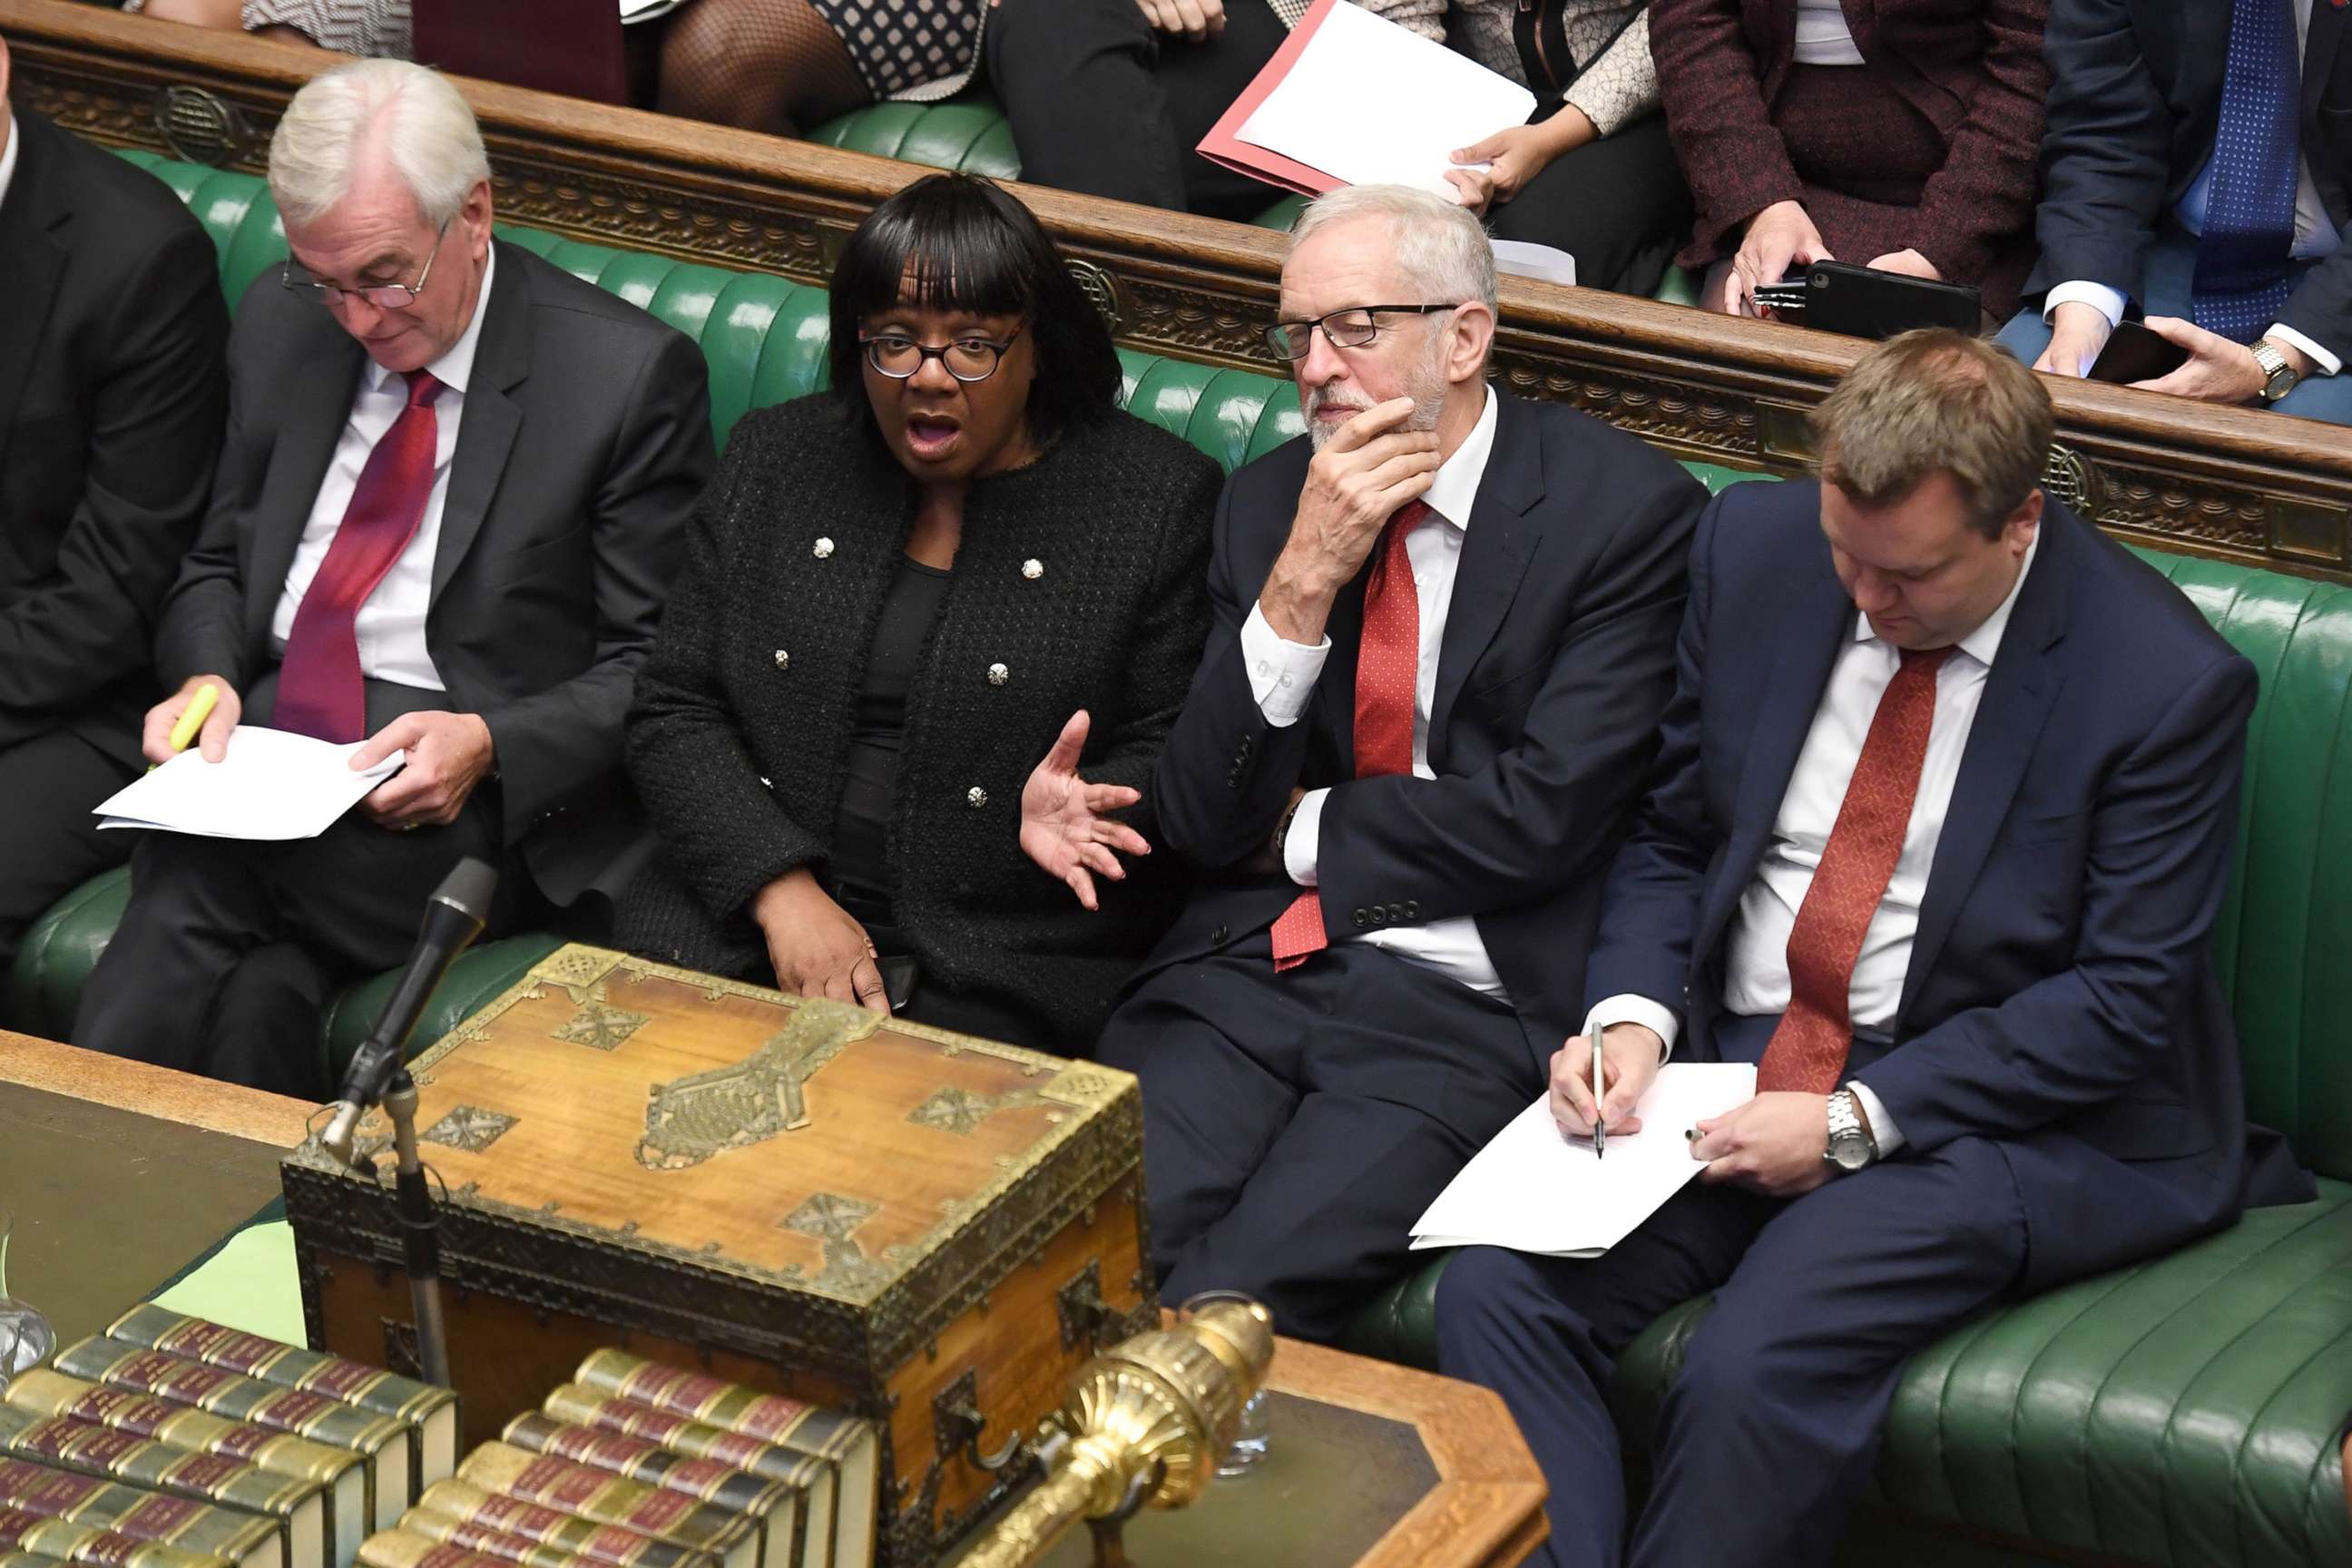 PHOTO:Labour party's shadow Chancellor John McDonnell, Labour Party shadow home secretary Diane Abbott, Labour Party Leader Jeremy Corbyn and Labour Party Mp Nick Thomas-Symonds sitting in the House of Commons in London, Sept. 25, 2019.